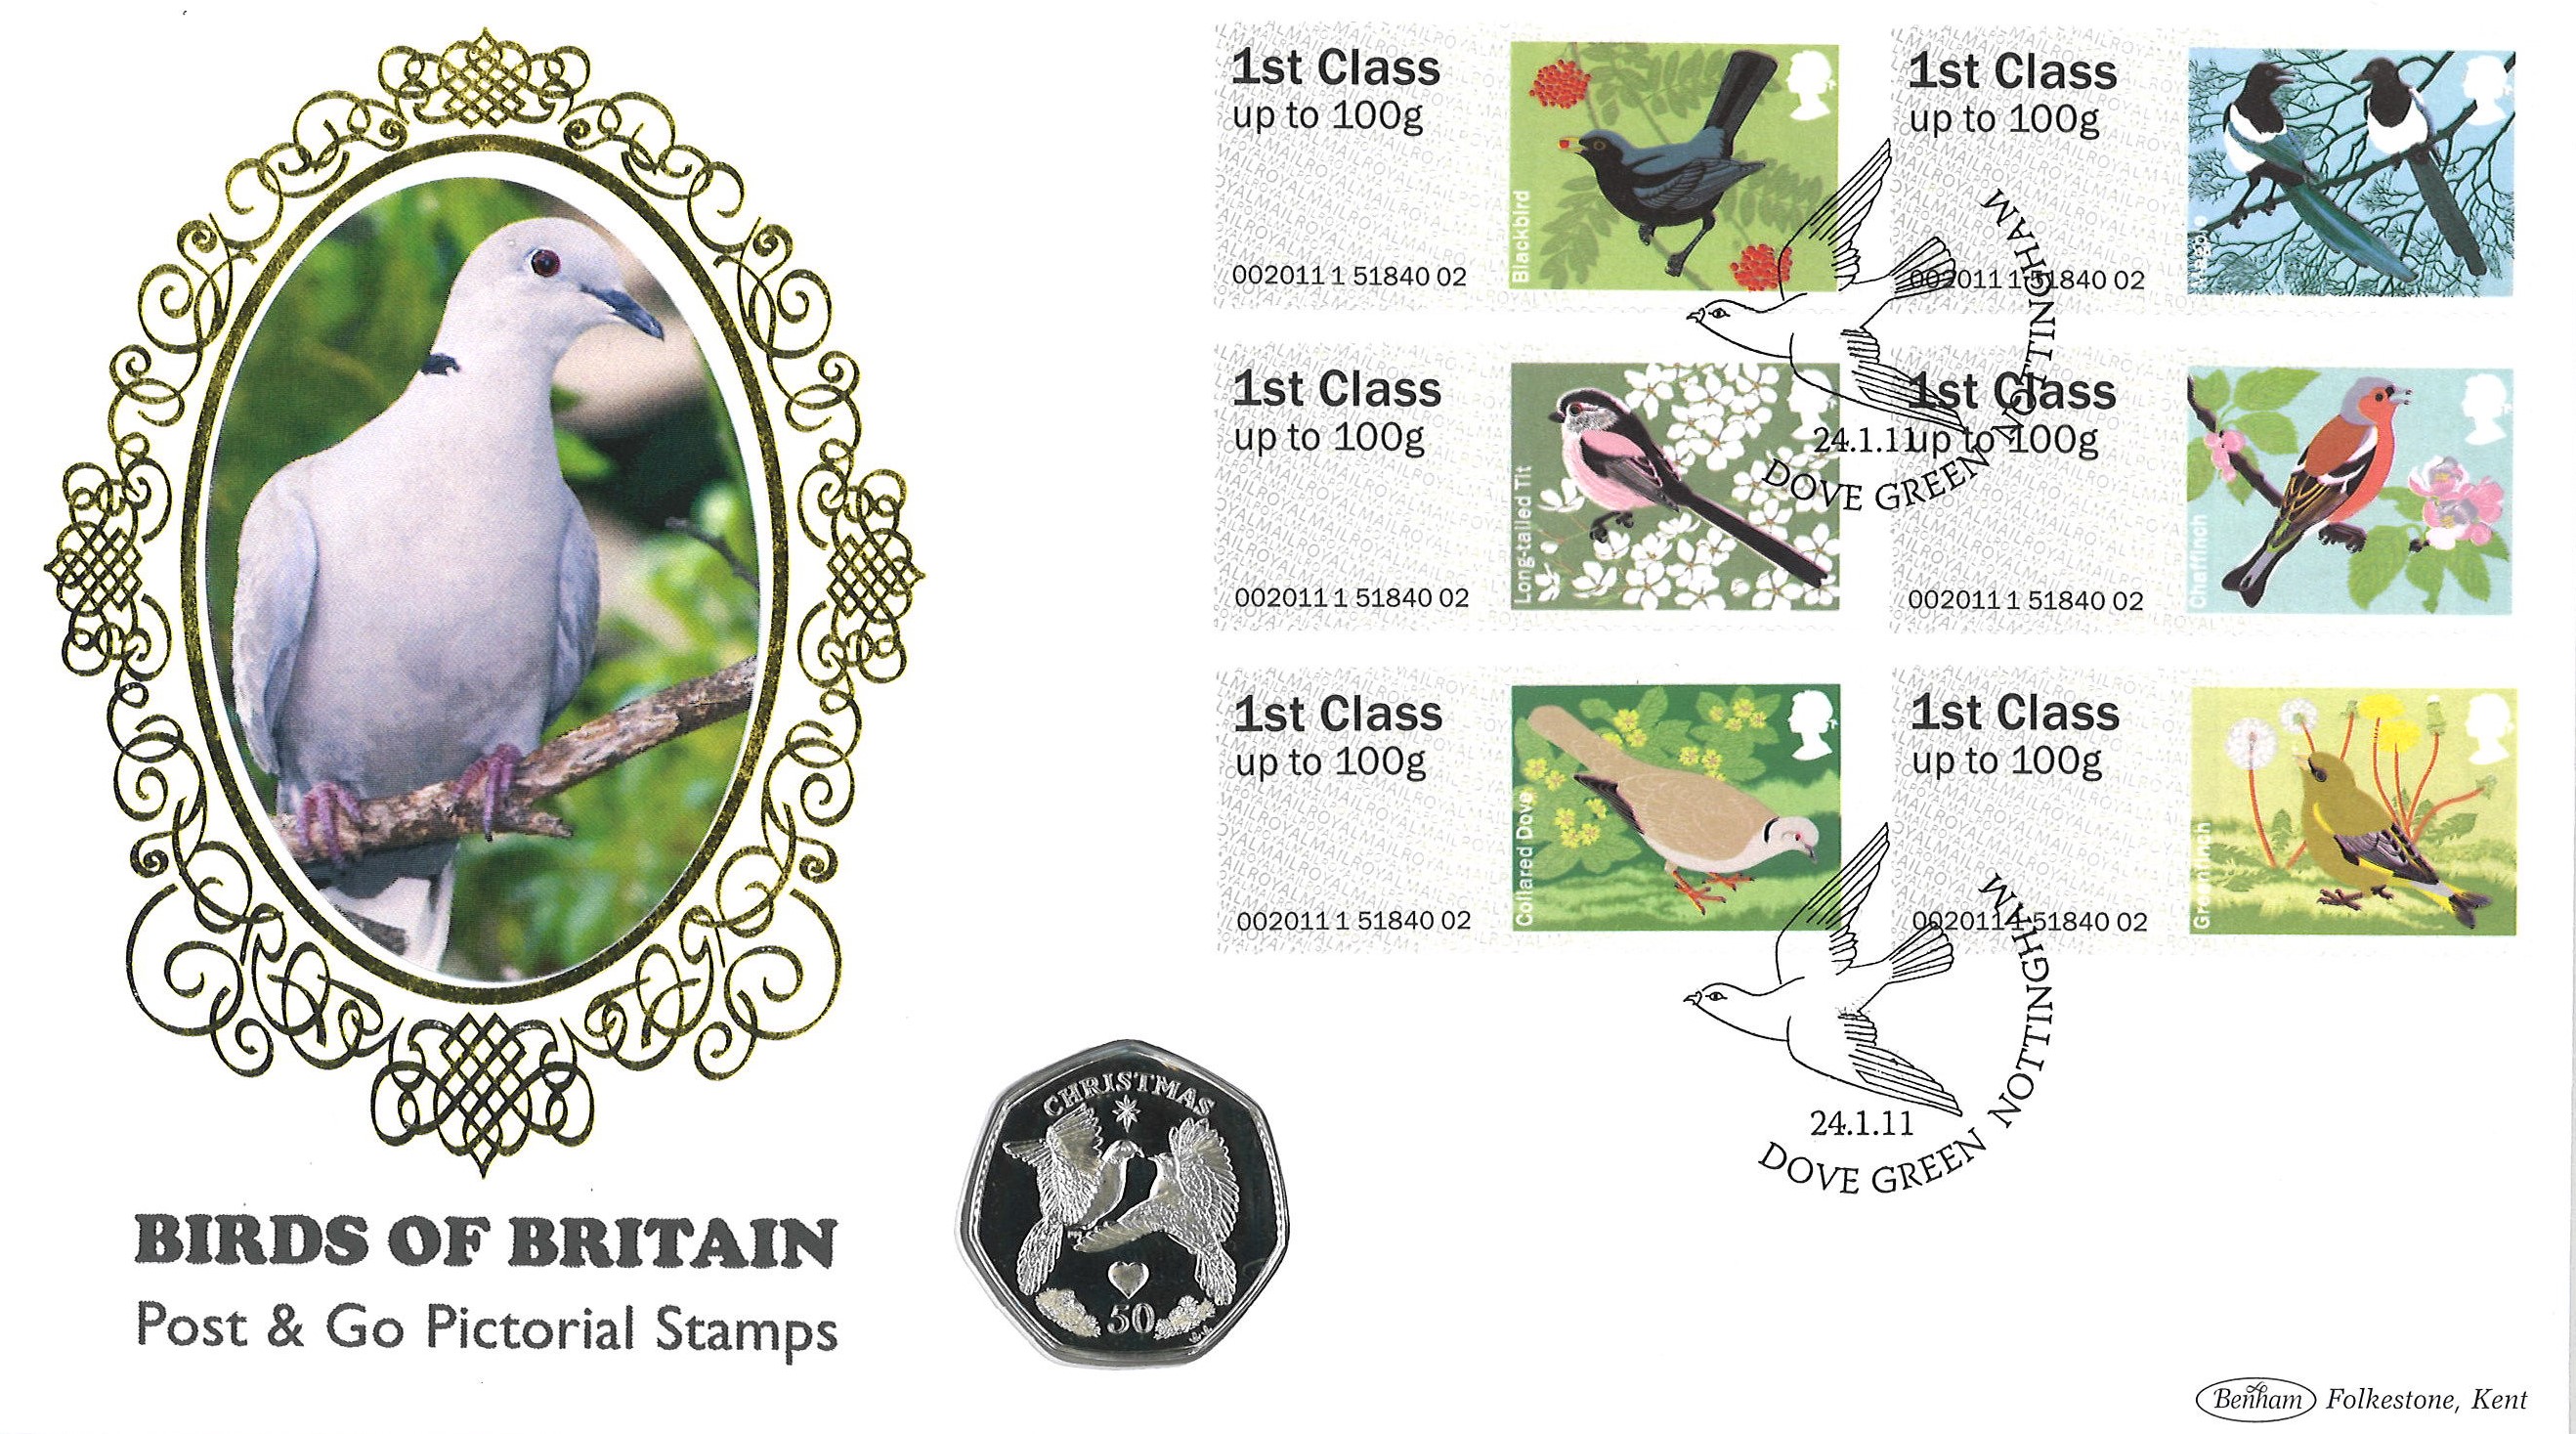 Birds of Britain coin cover. Benham official FDC PNC, with 2006 Isle of Man 50p coin inset. Dove